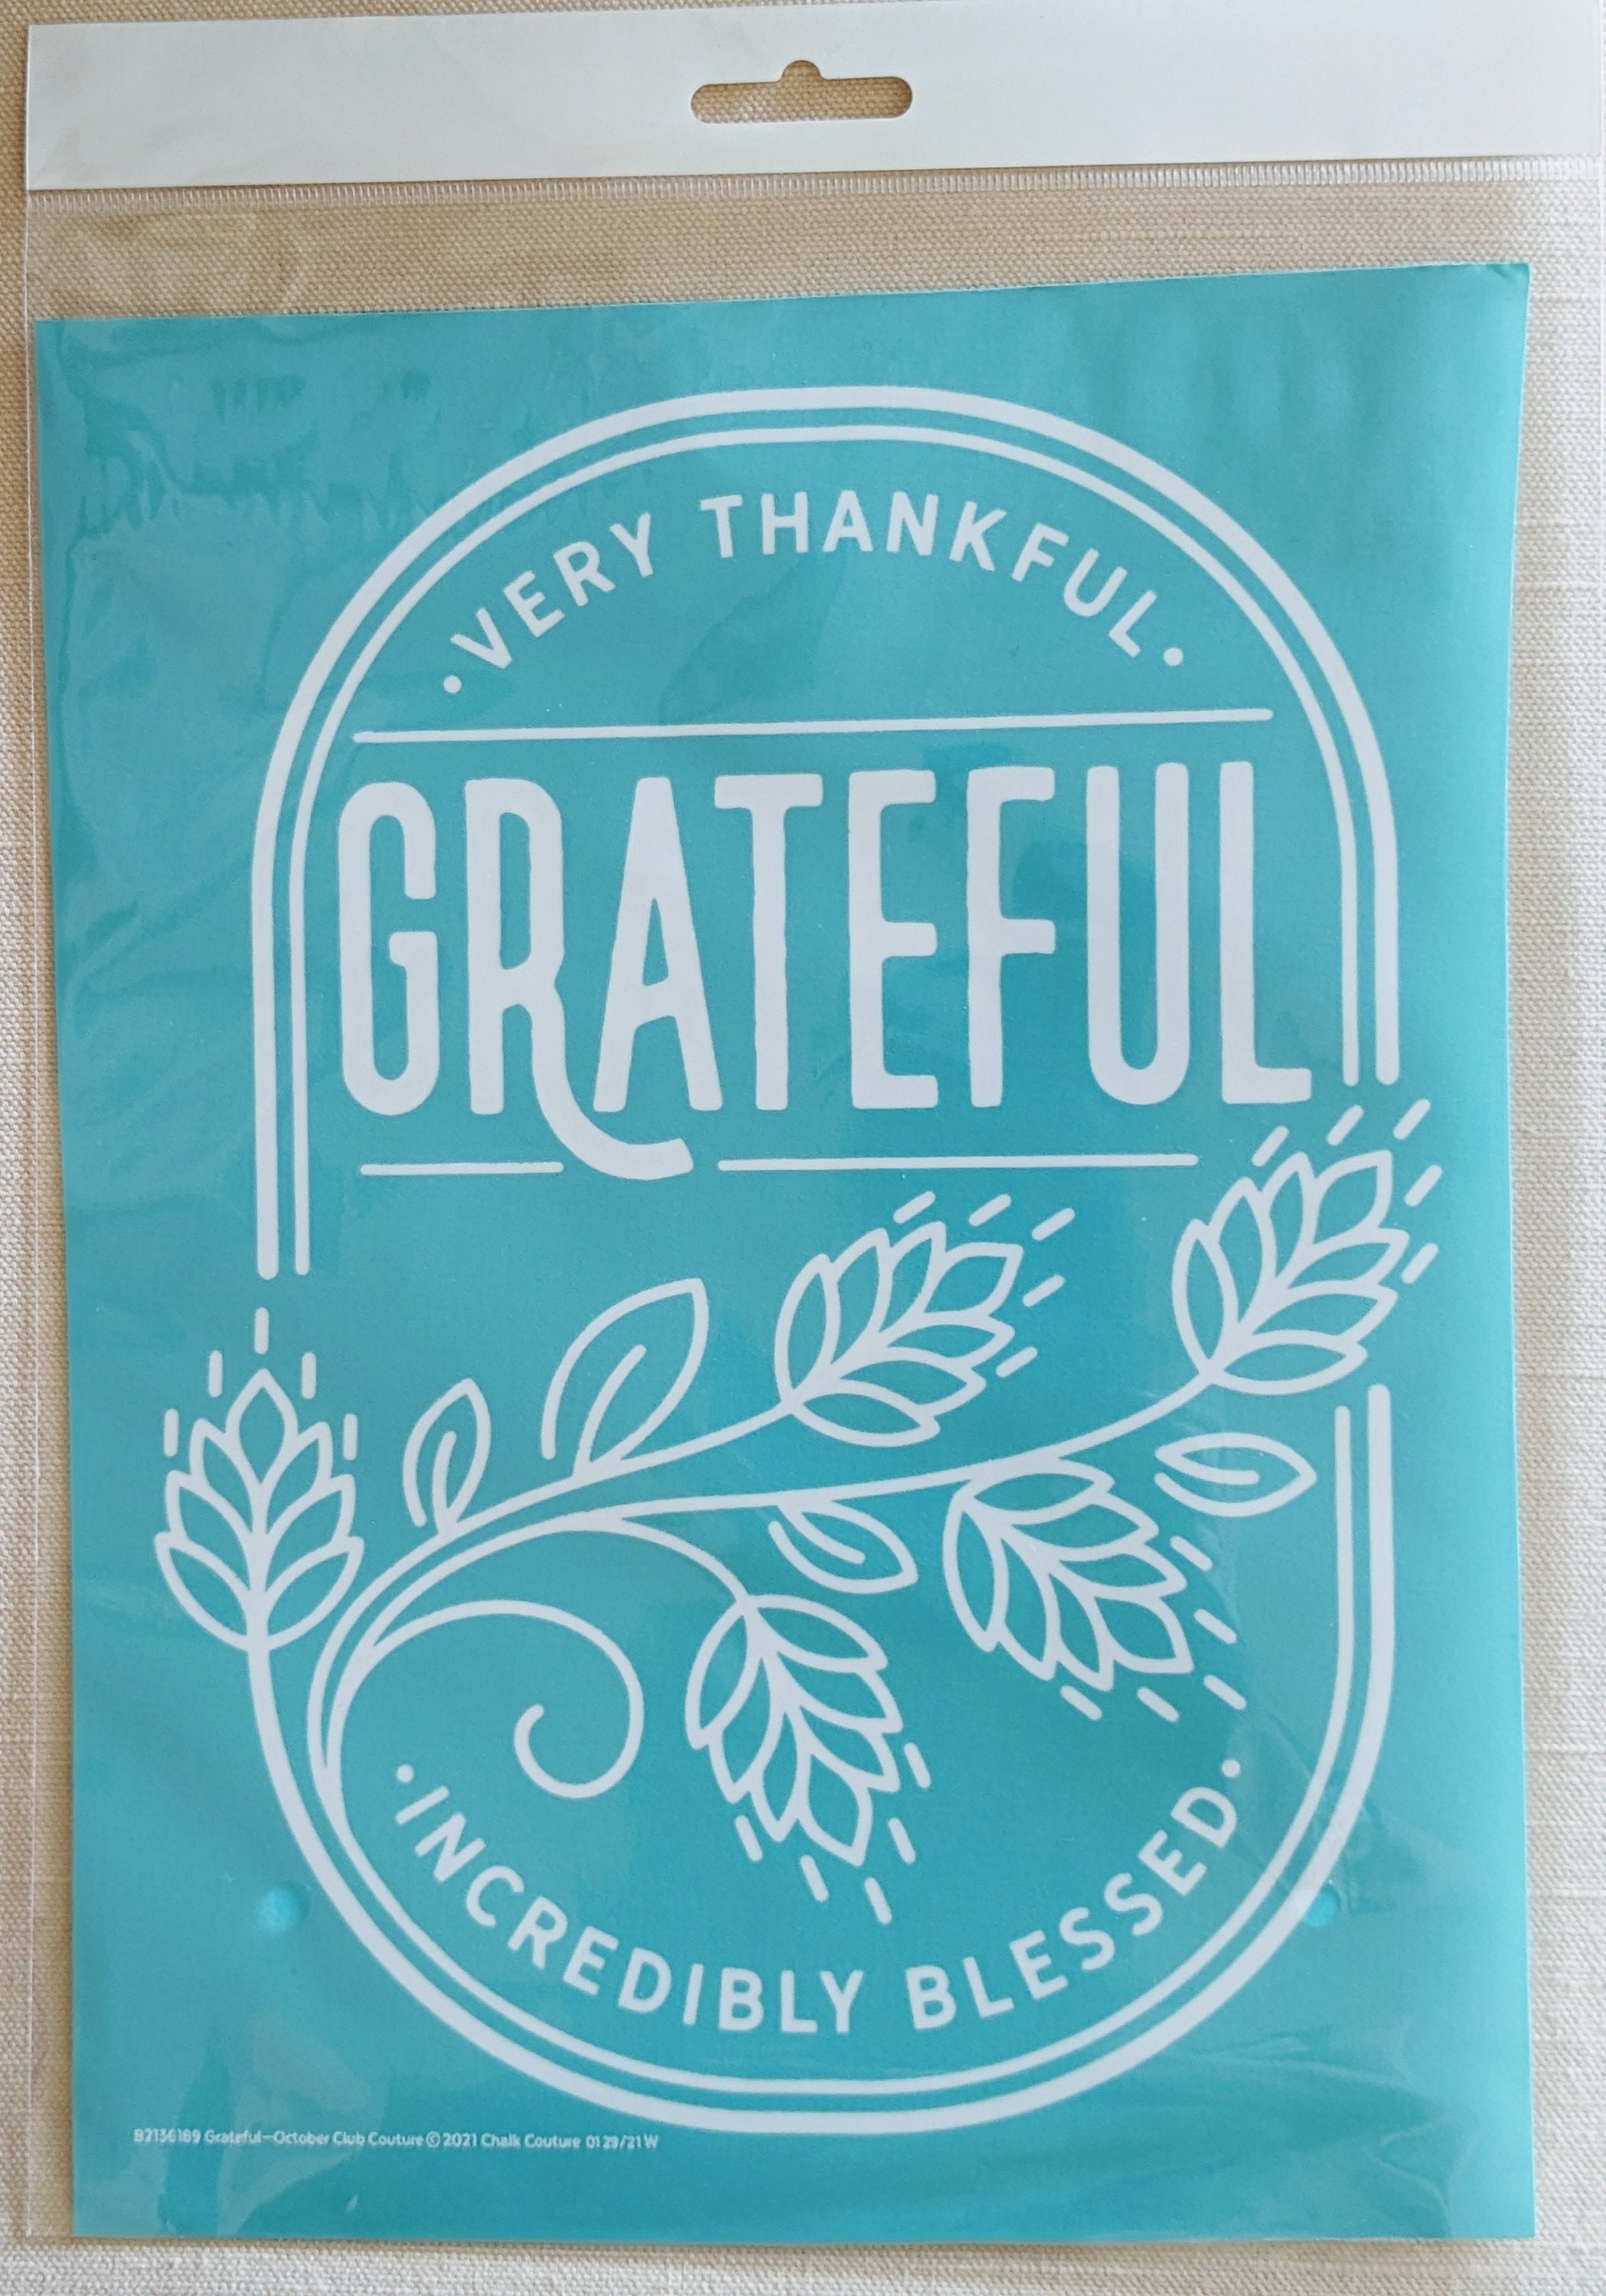 New Chalk Couture Transfer Very Thankful, Grateful, Incredibly Blessed